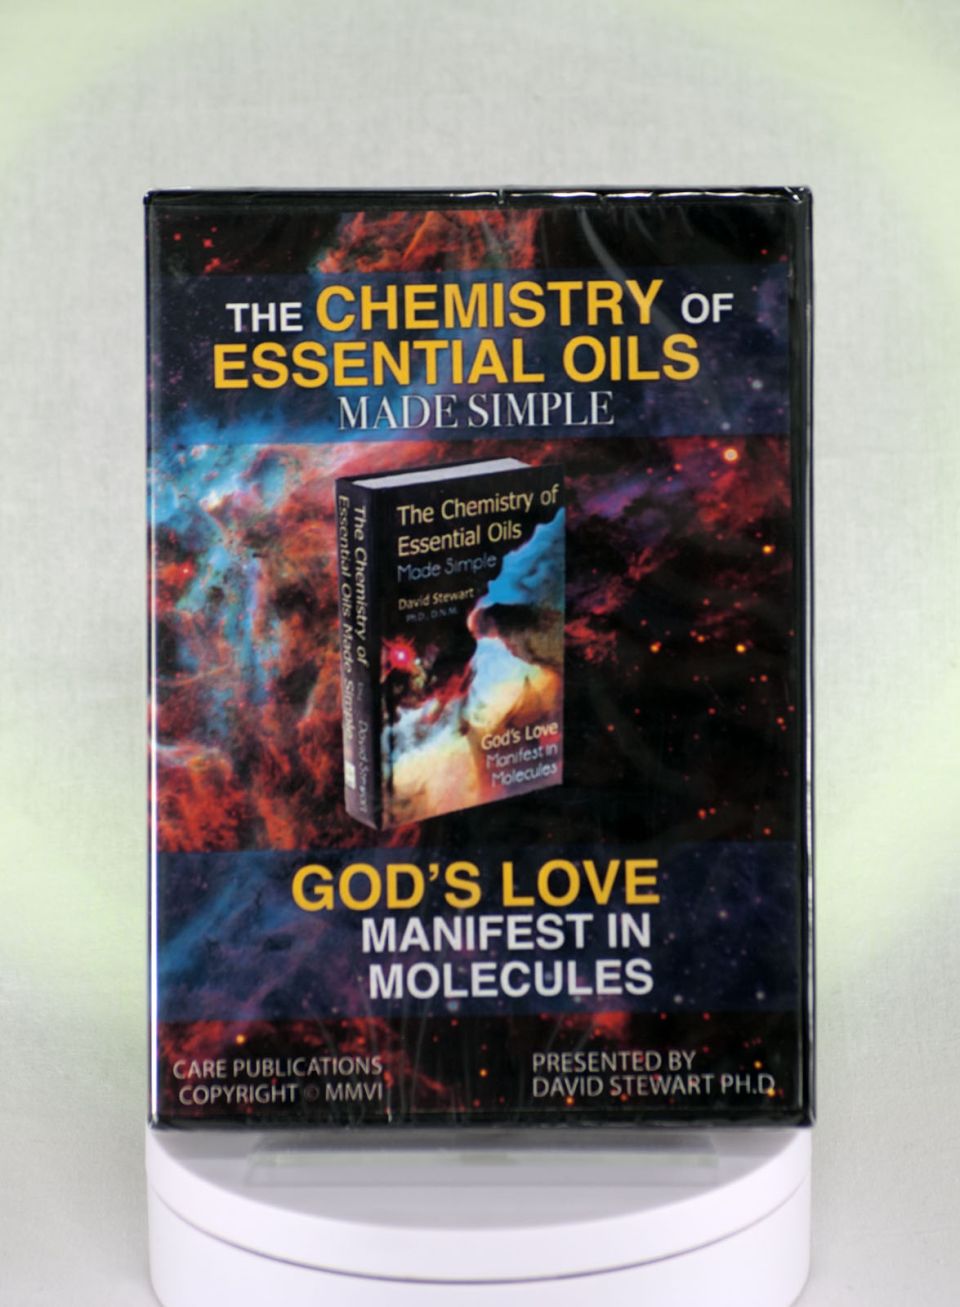 Chemistry of Essential Oils Made Simple